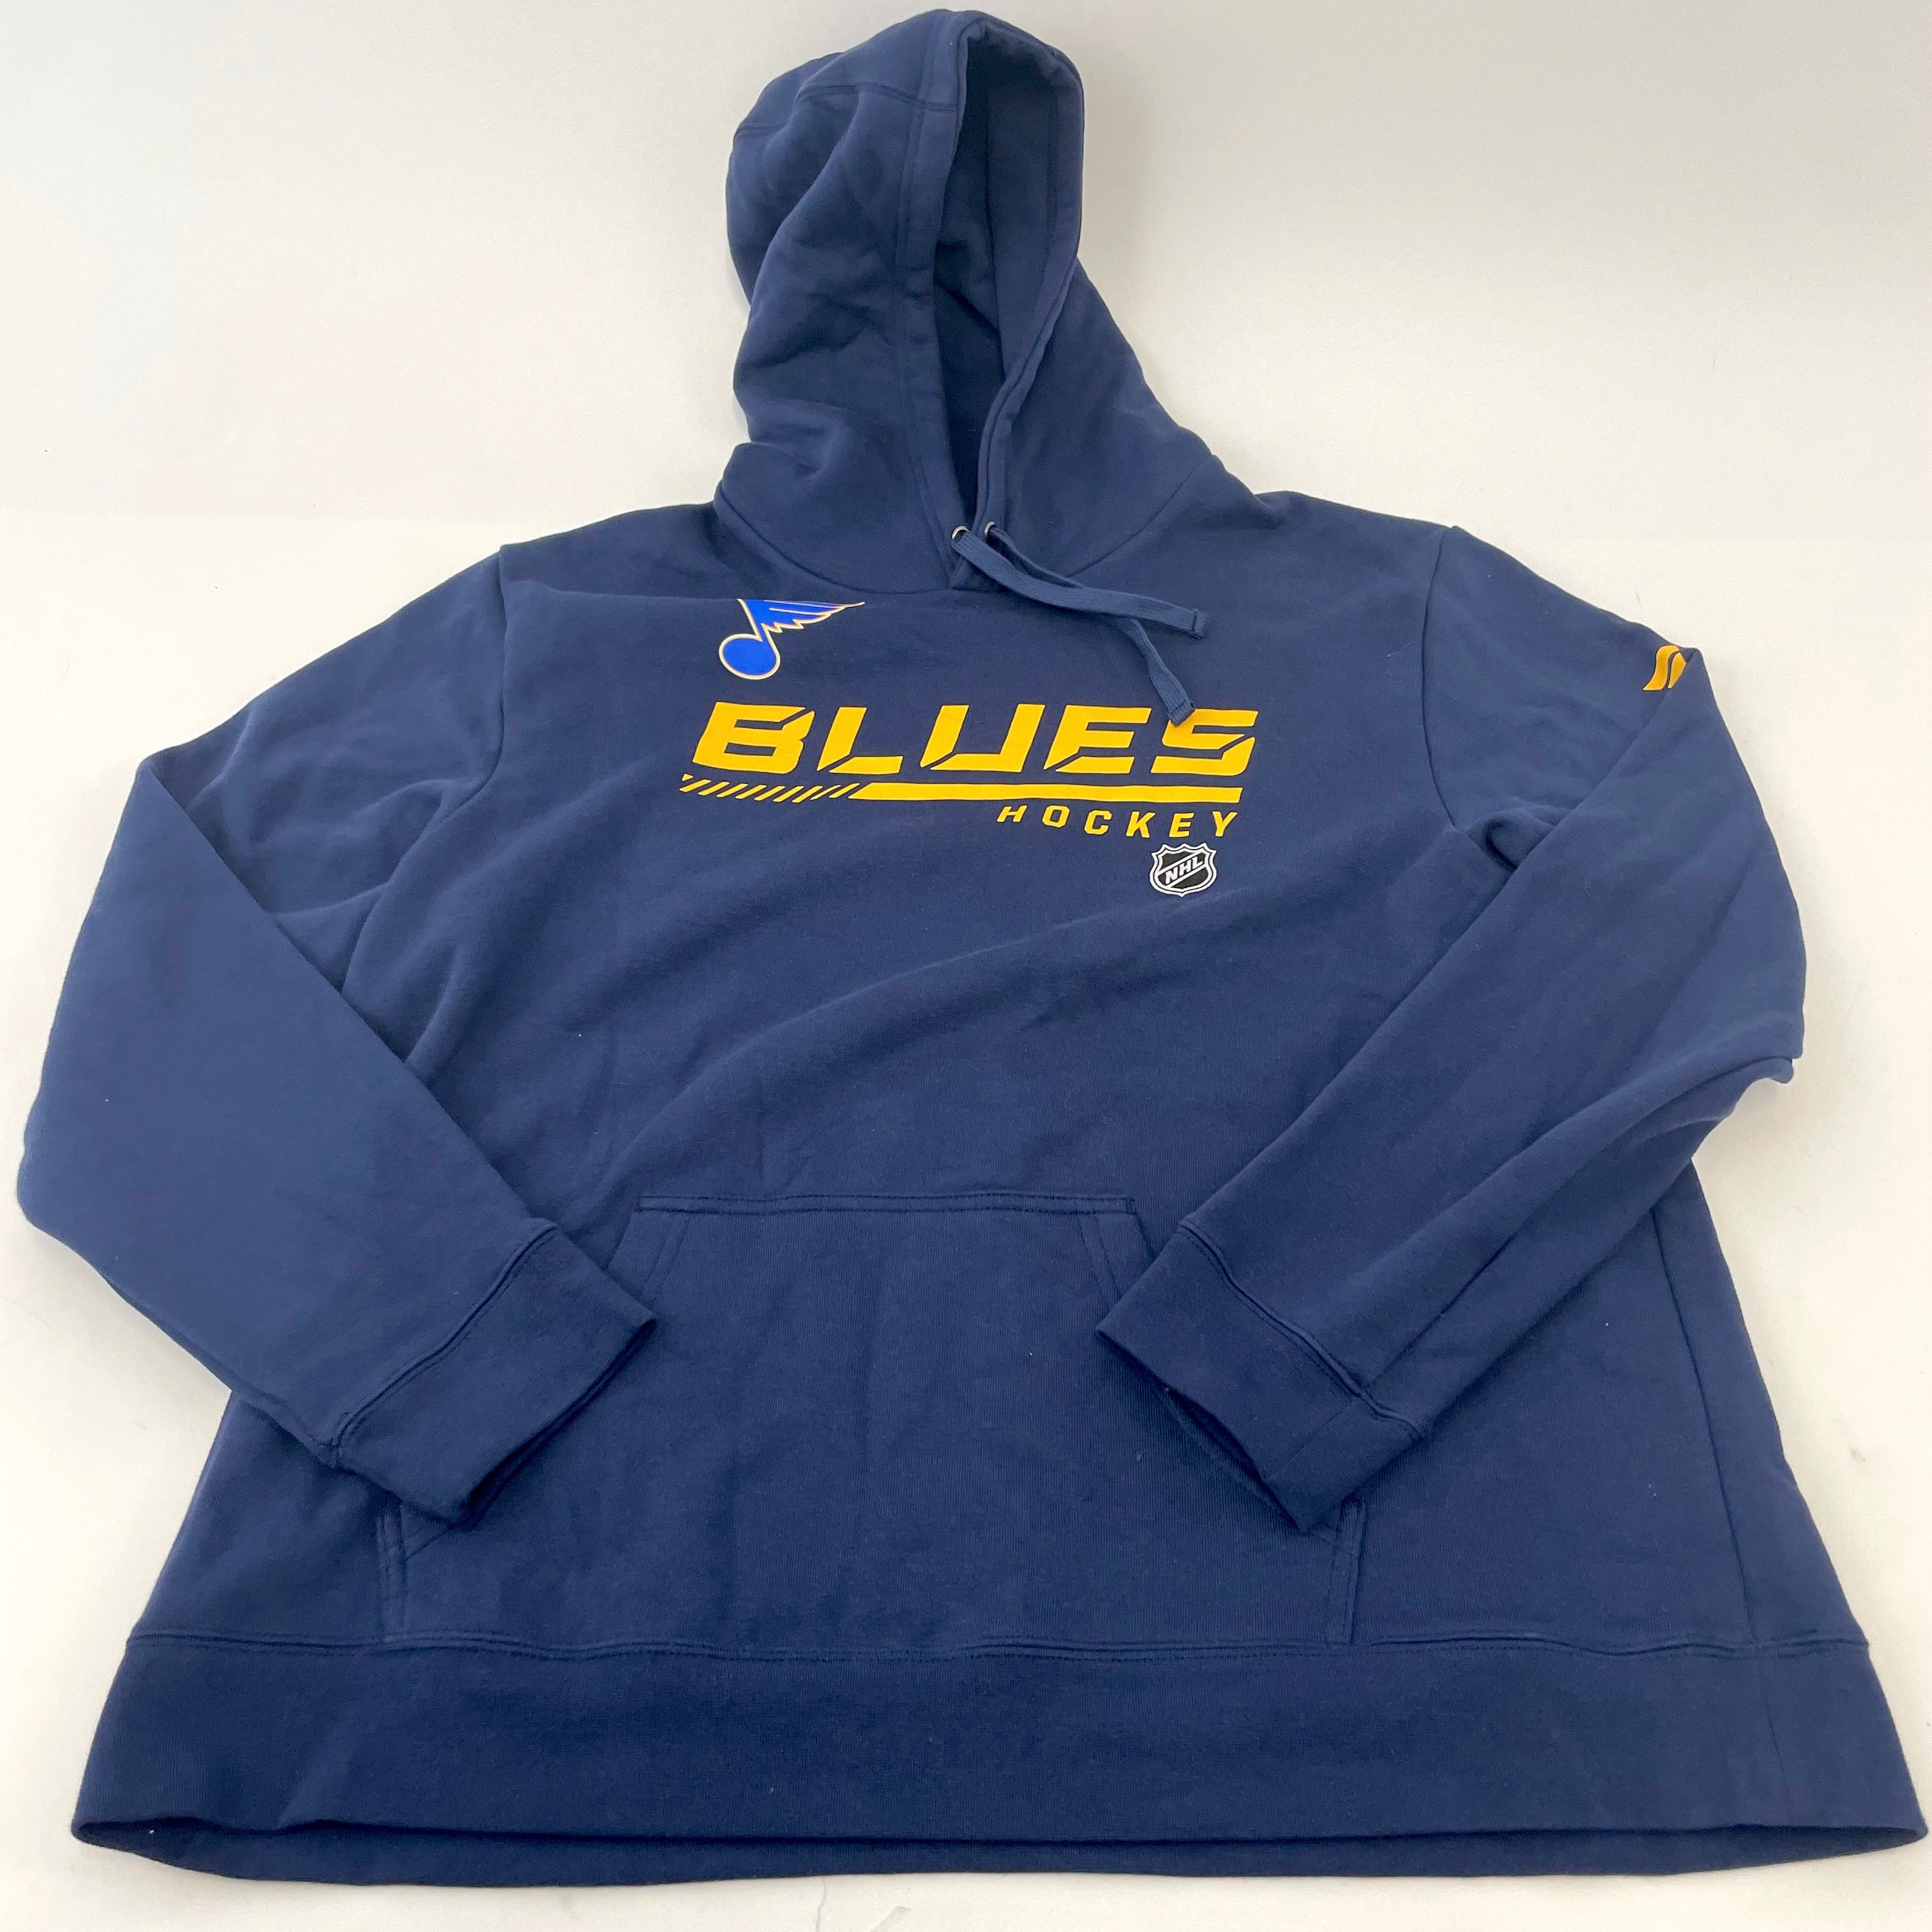 ST. LOUIS BLUES NHL AUTHENTIC GRAY/ BLUE LOGO HOODED KNIT SWEATER SZ LARGE  NWT